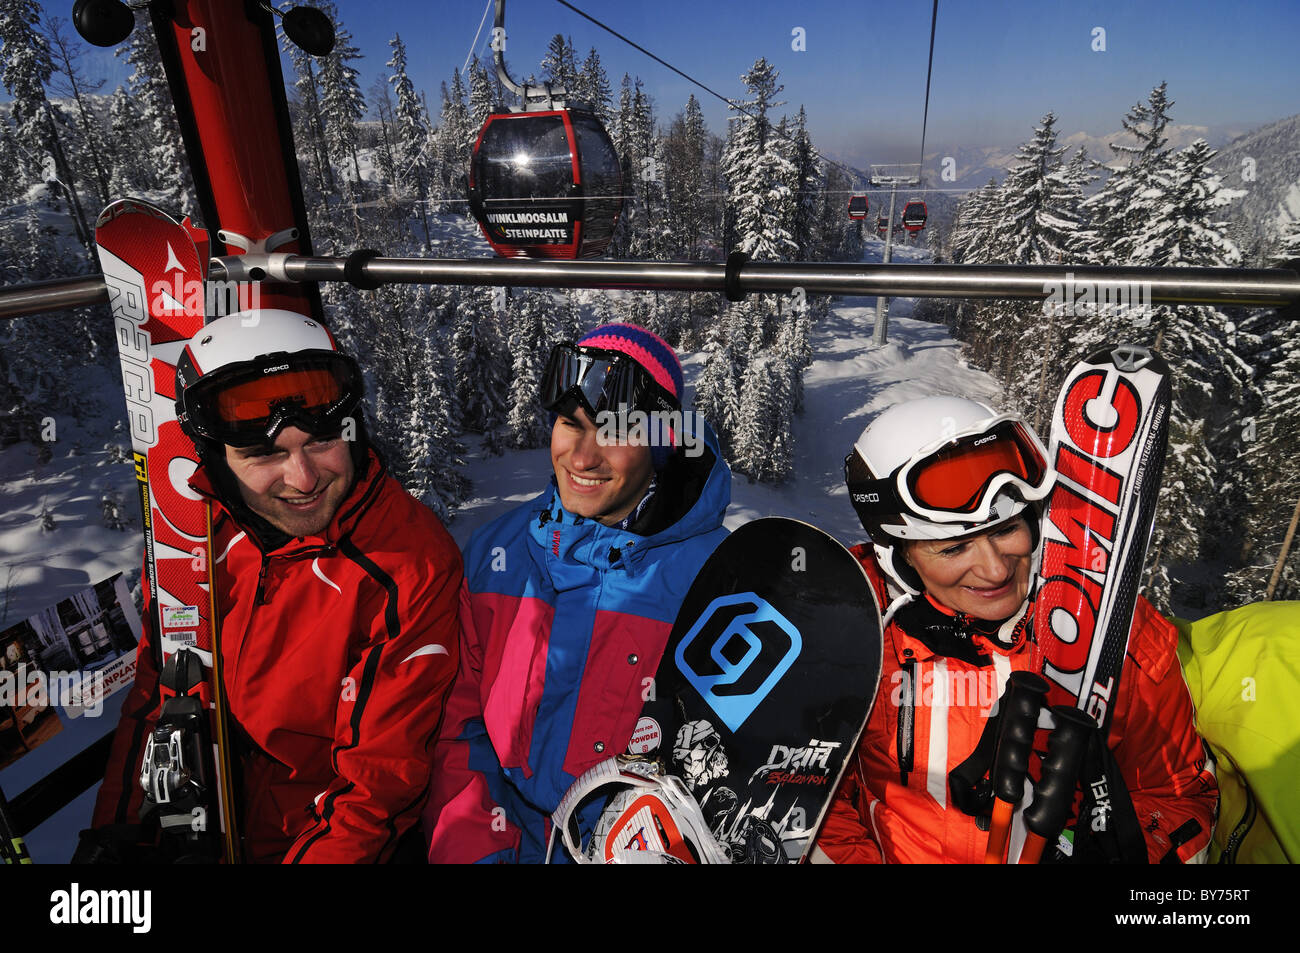 Skiers and snowboarder at cable car, Reit im Winkl, Chiemgau, Upper Bavaria, Bavaria, Germany, Europe Stock Photo